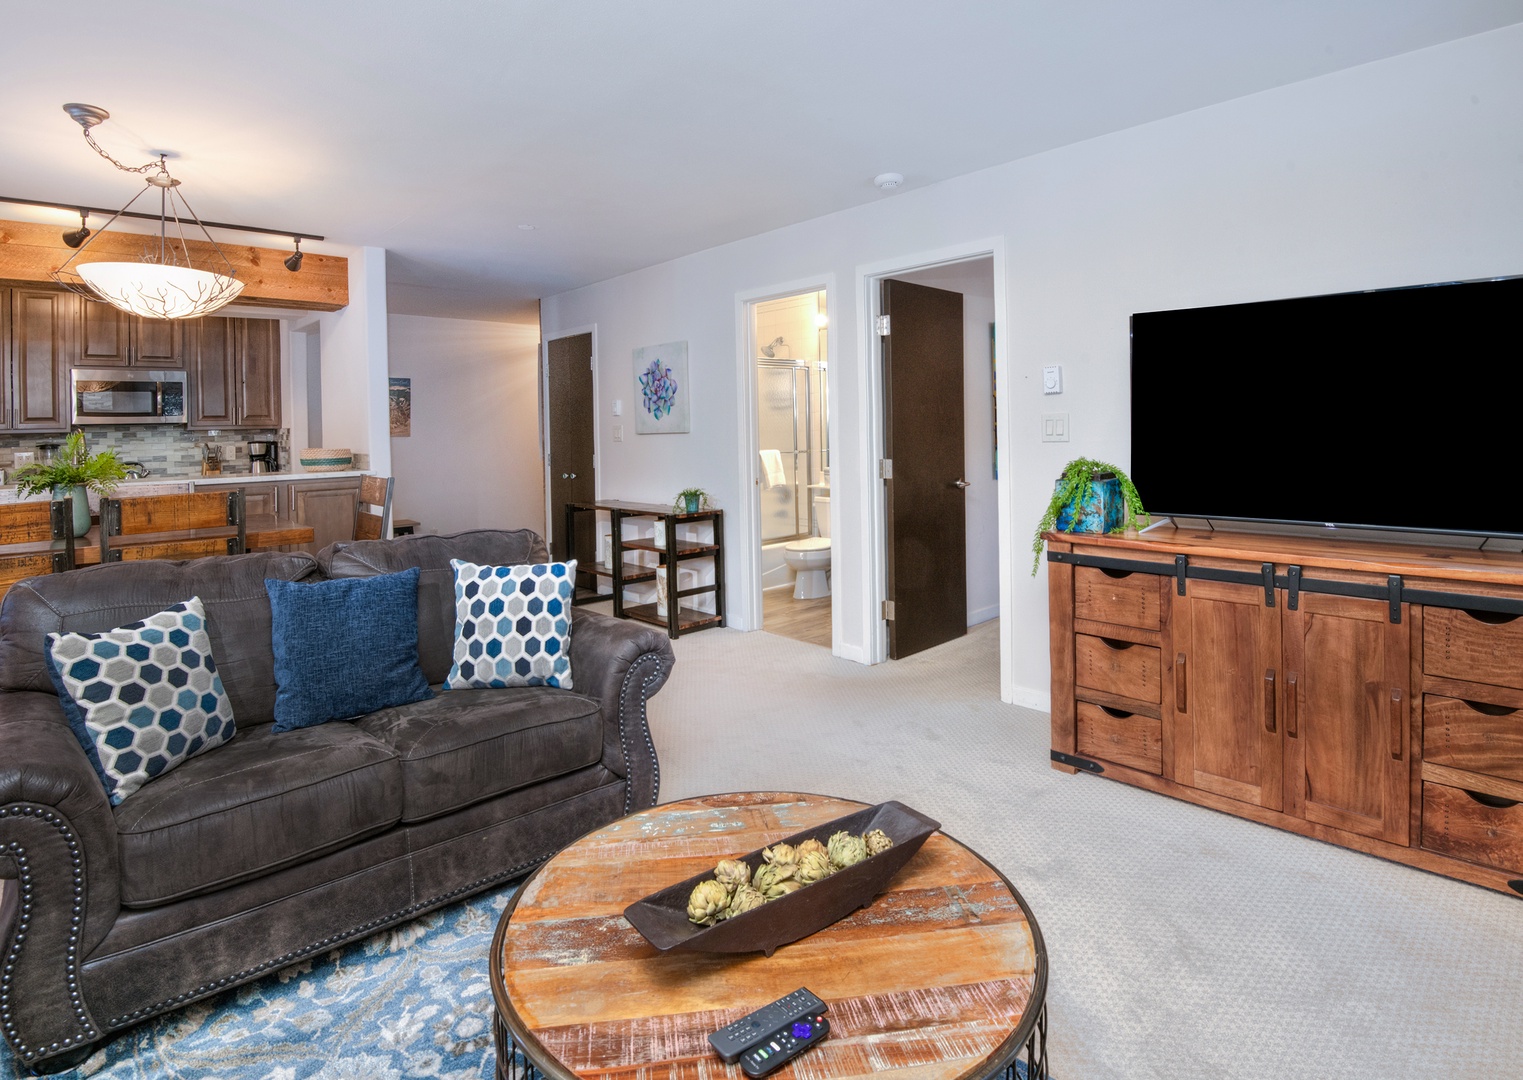 Step into Beaver Creek Townsend Getaway where every moment is a retreat into tranquility